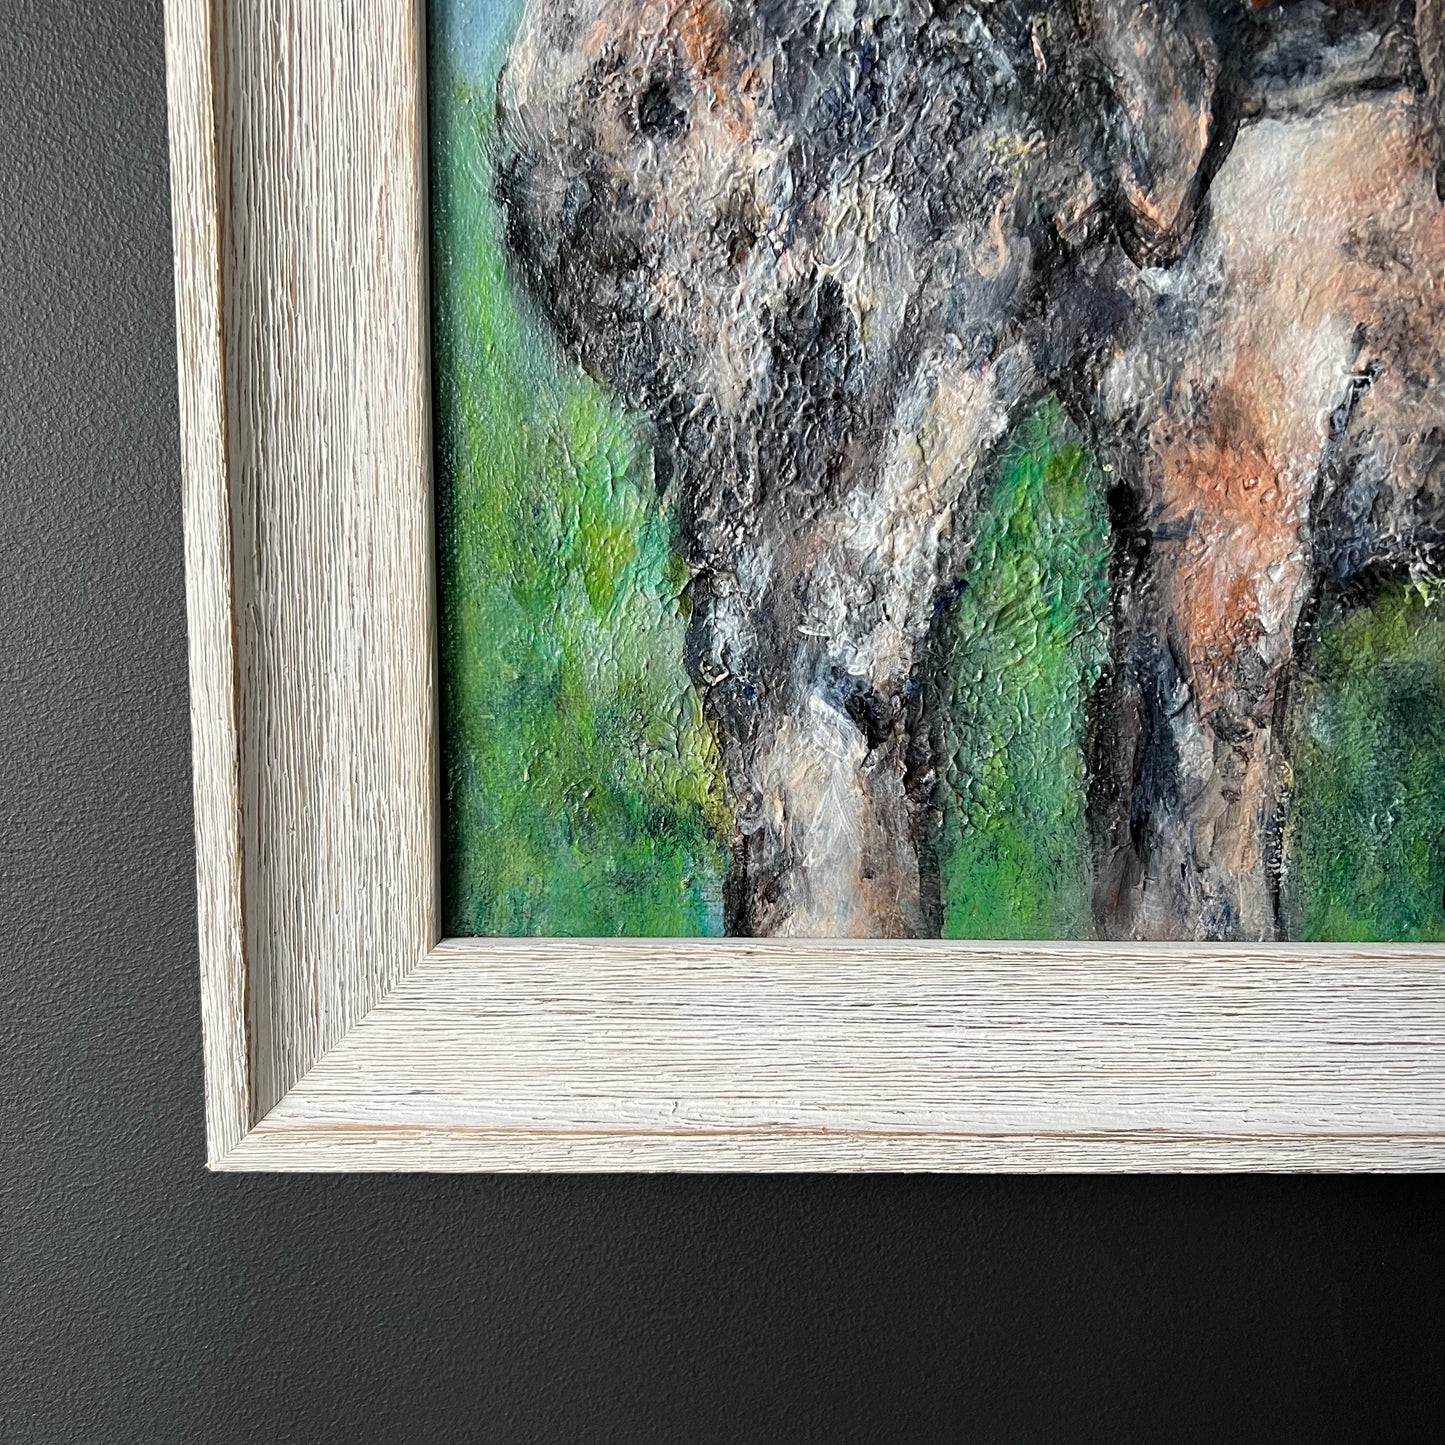 Vintage Oil Painting The Friendly Cow